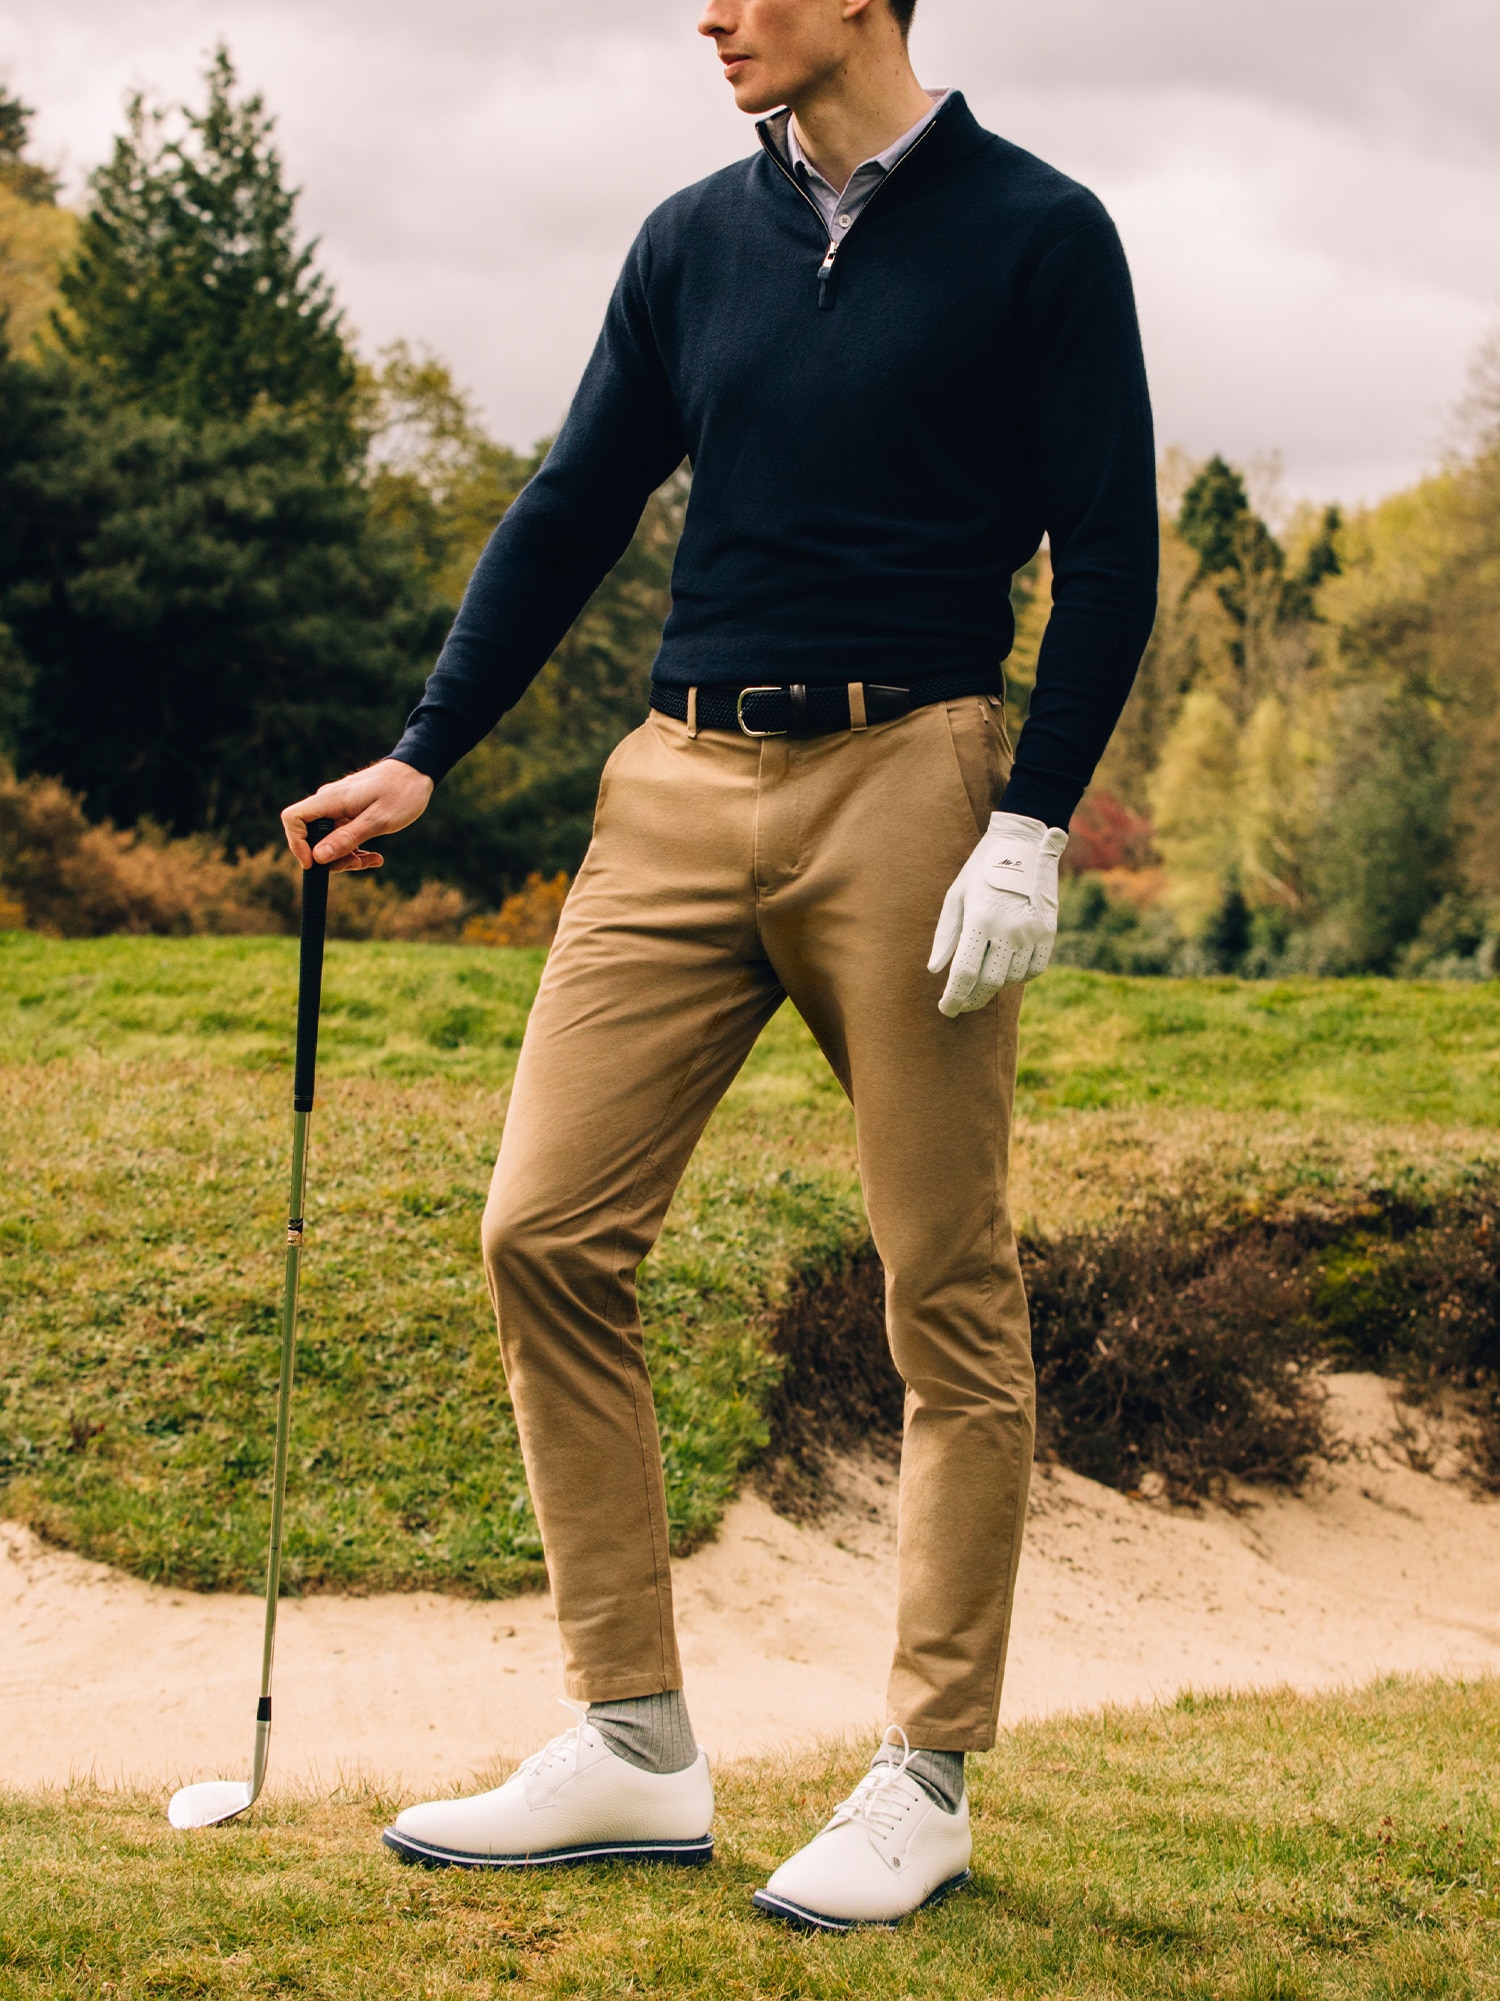 Golf Outfits for Men. Have you man look great on the golf course!